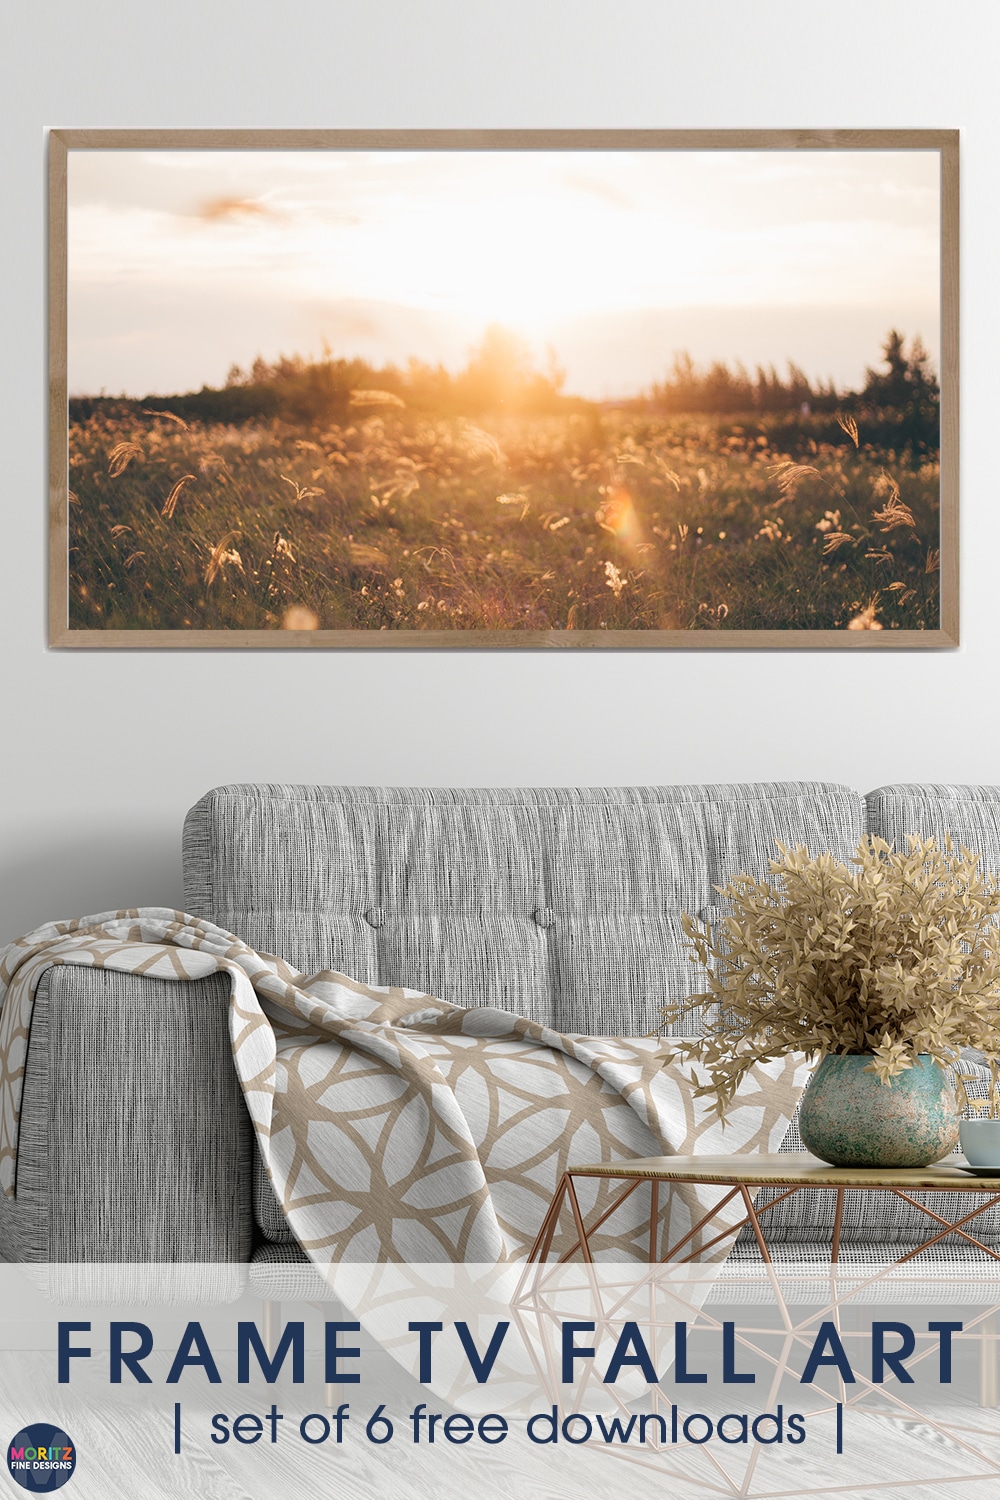 Update your Samsung Frame TV with one of these beautiful free instant download digital prints. Simply upload and display in just minutes.